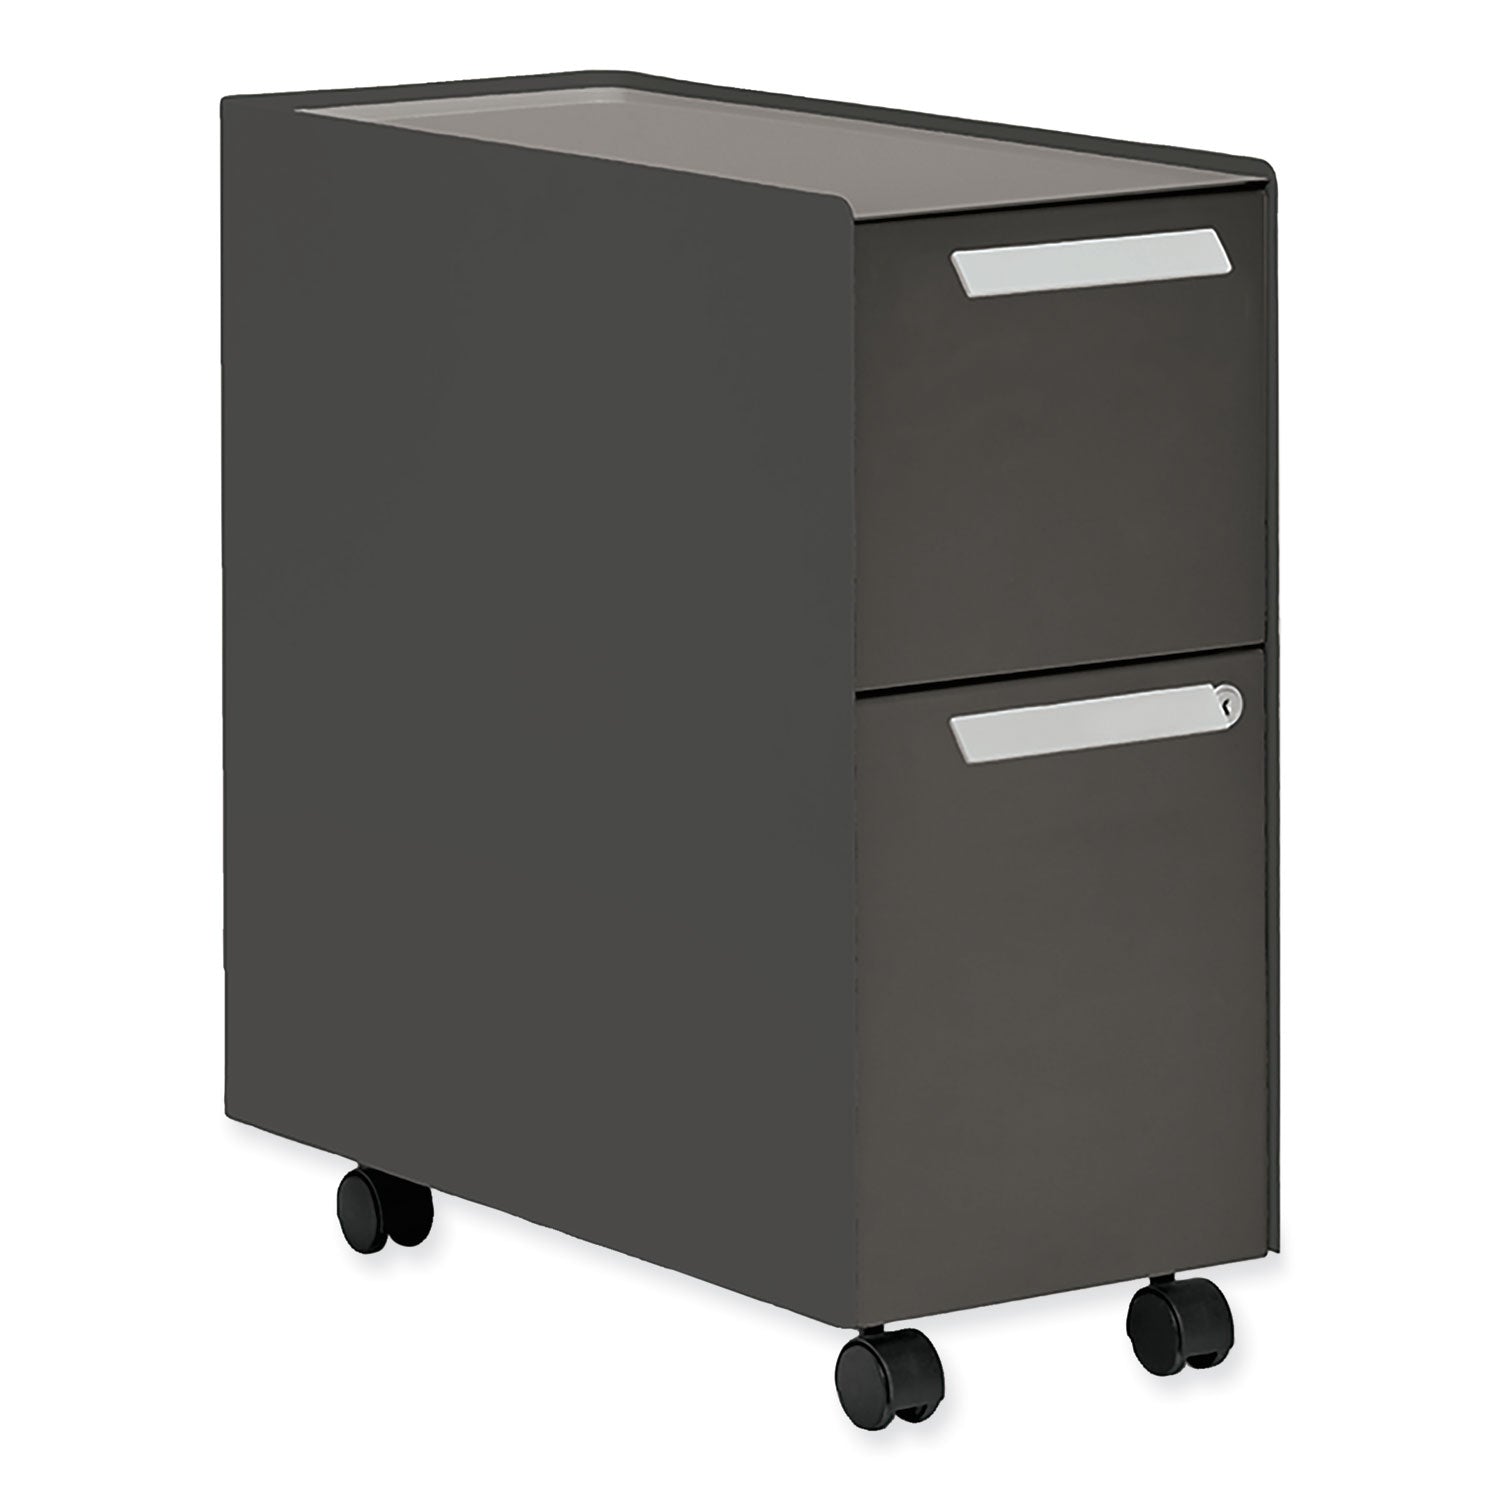 radii-2-drawer-mobile-file-cabinet-2-legal-letter-size-file-drawers-flint-10-x-24-x-21_aszmbs249tfn001 - 1